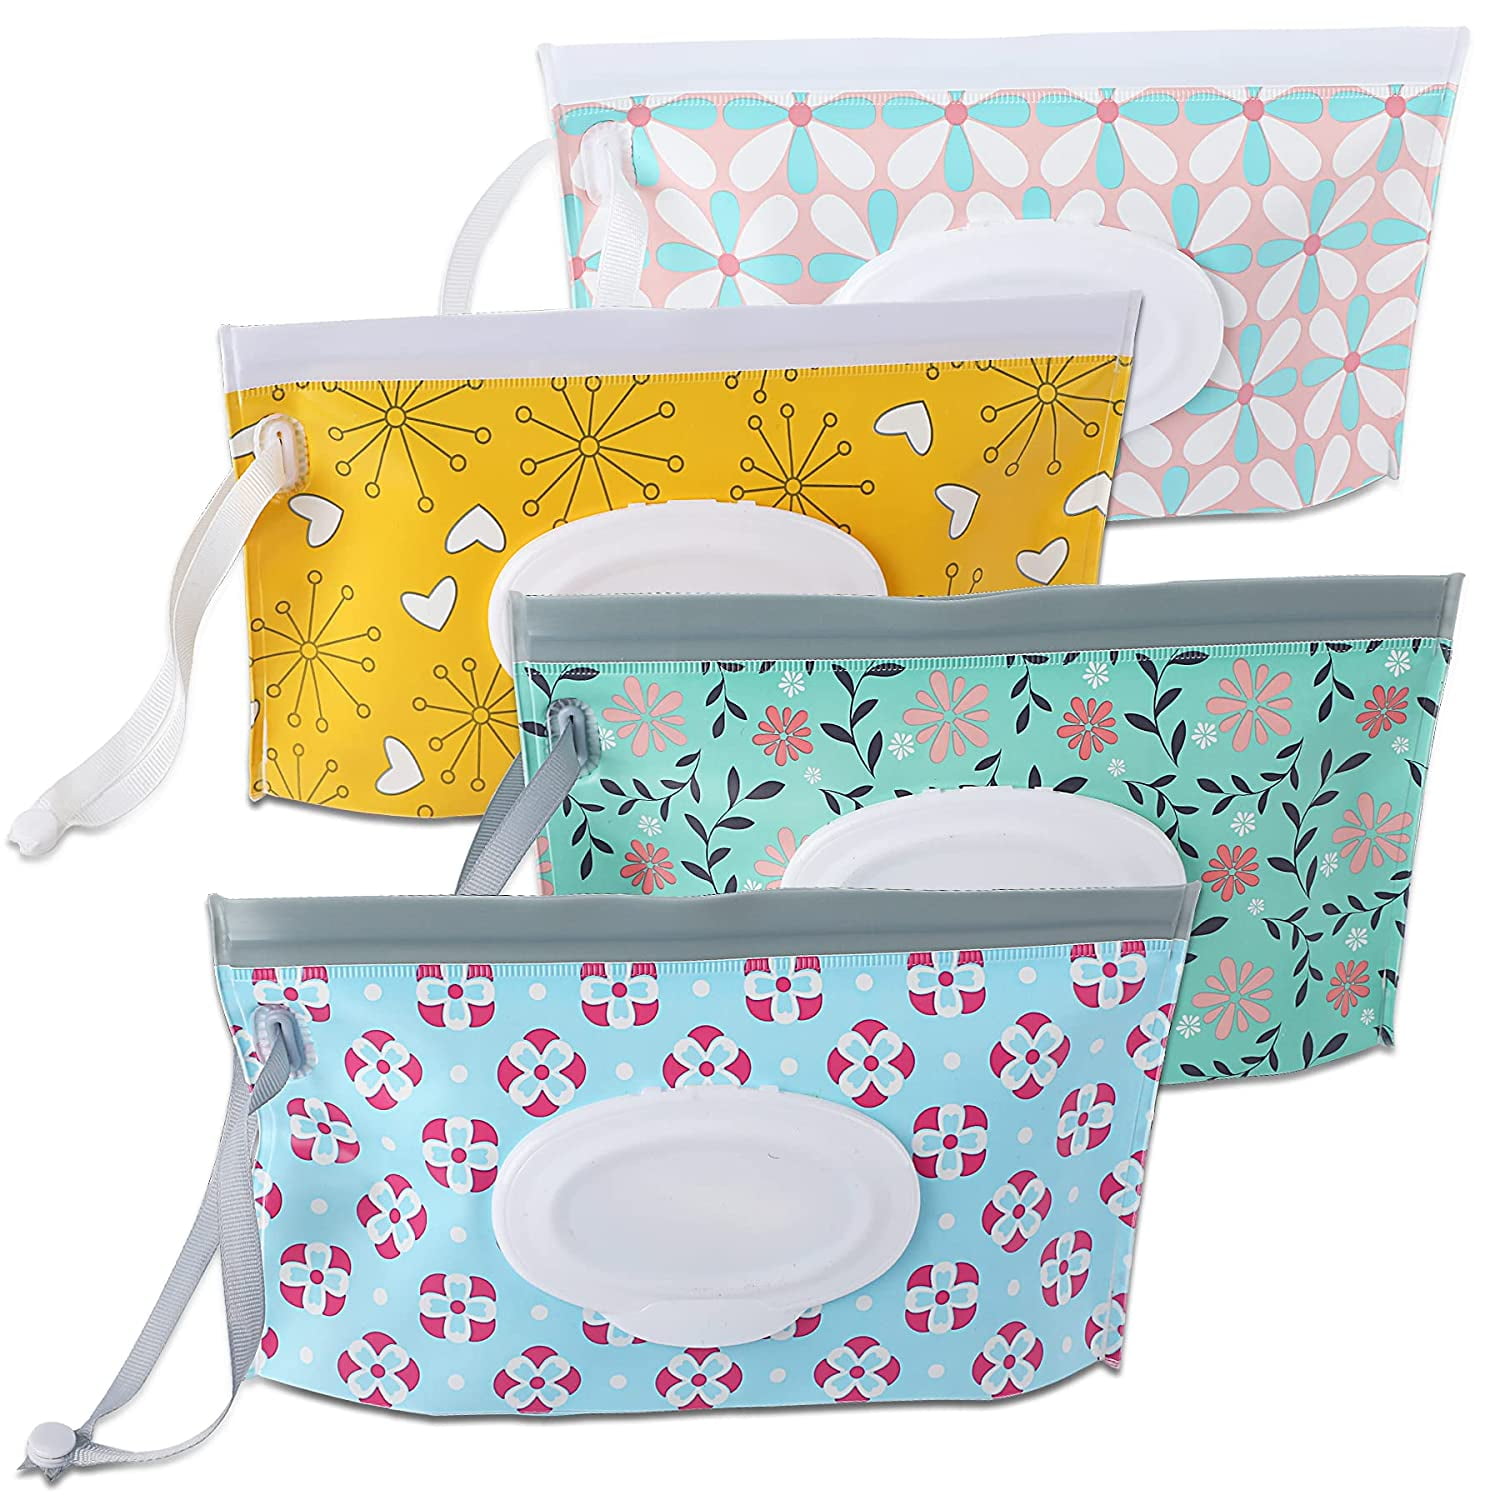 3 Pack Baby Wipes Dispenser Portable Wet Wipe Dispenser Bag Reusable Travel Baby Wipes Container Refillable Wet Wipe Carrying Case Holder for Diaper Bag Lightweight Travel Wipes Dispenser Cases 4PC 